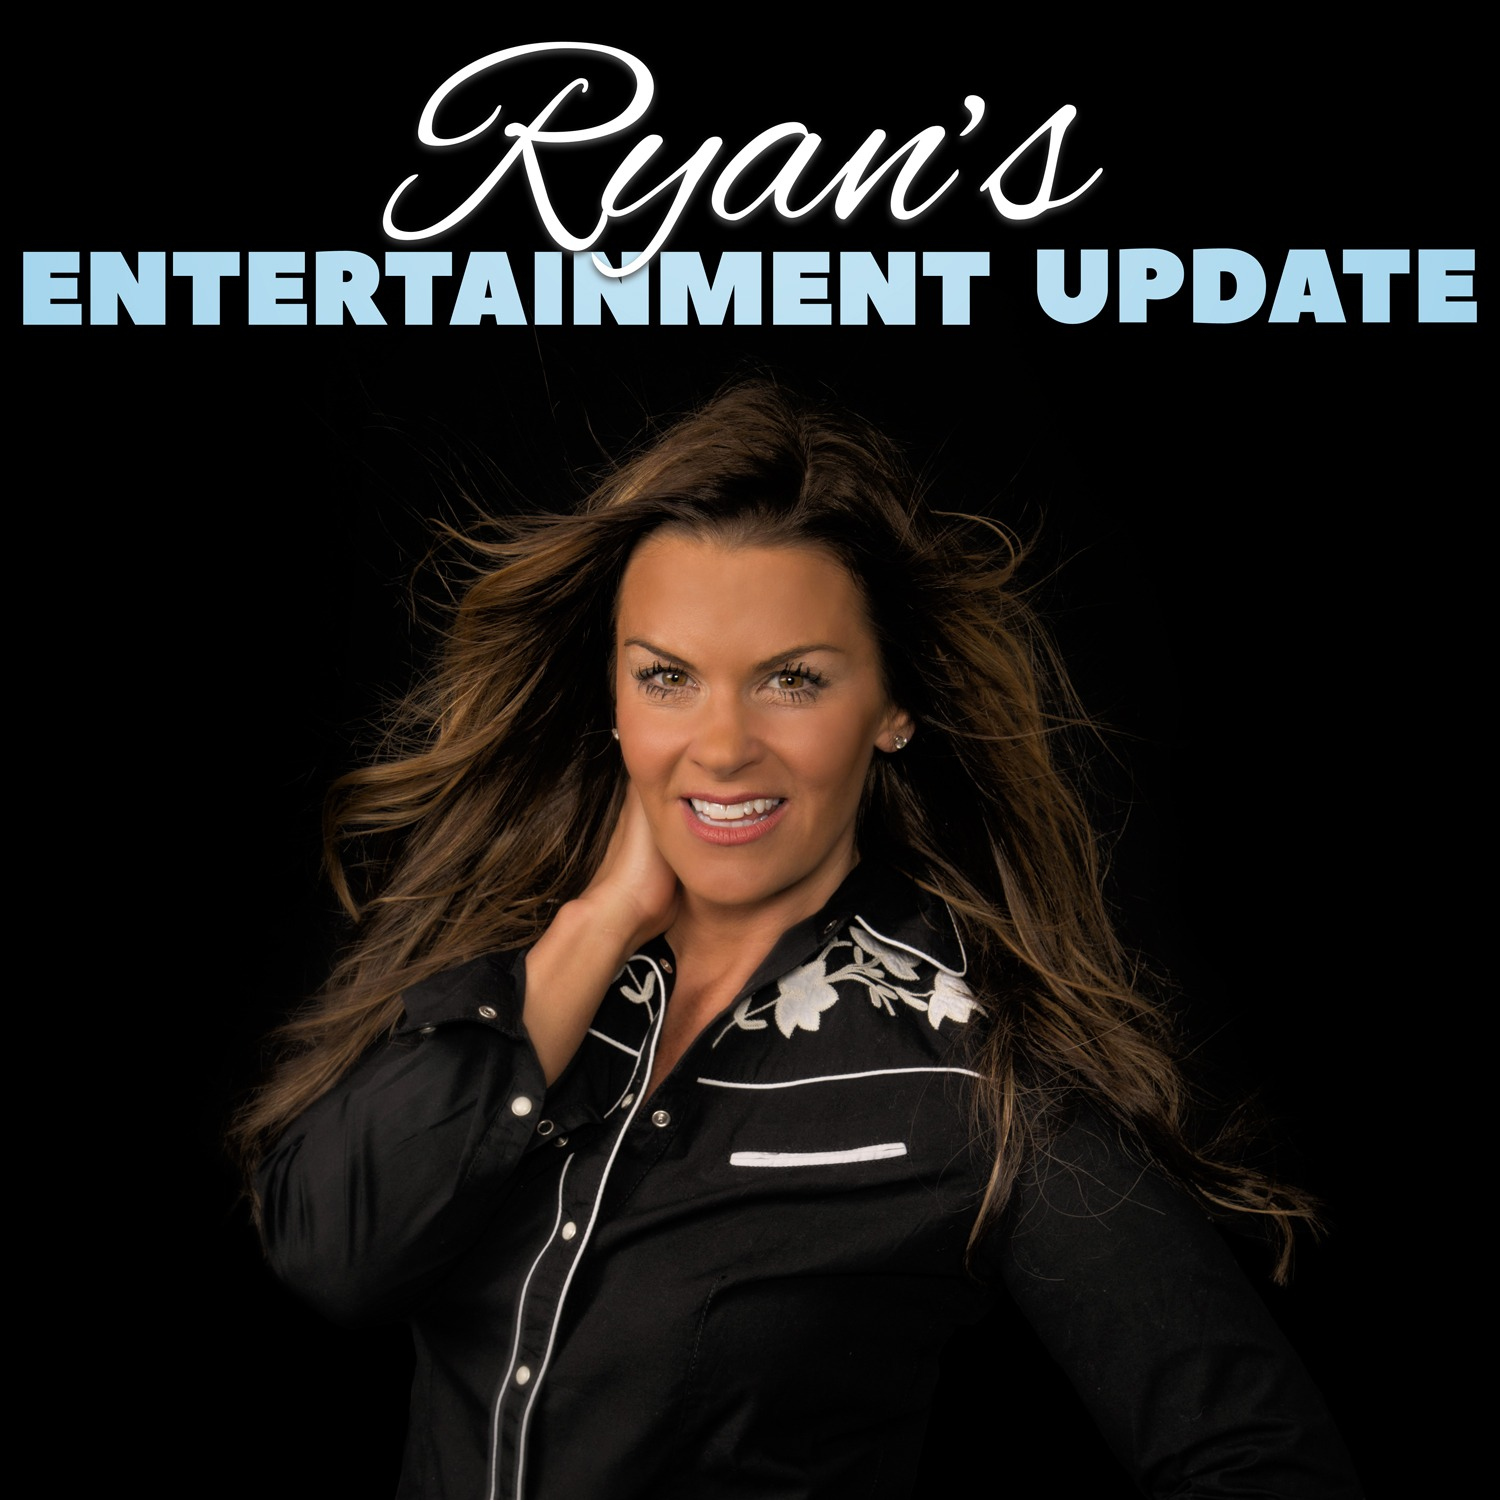 Ryan's Entertainment Update: Friday, July 31st